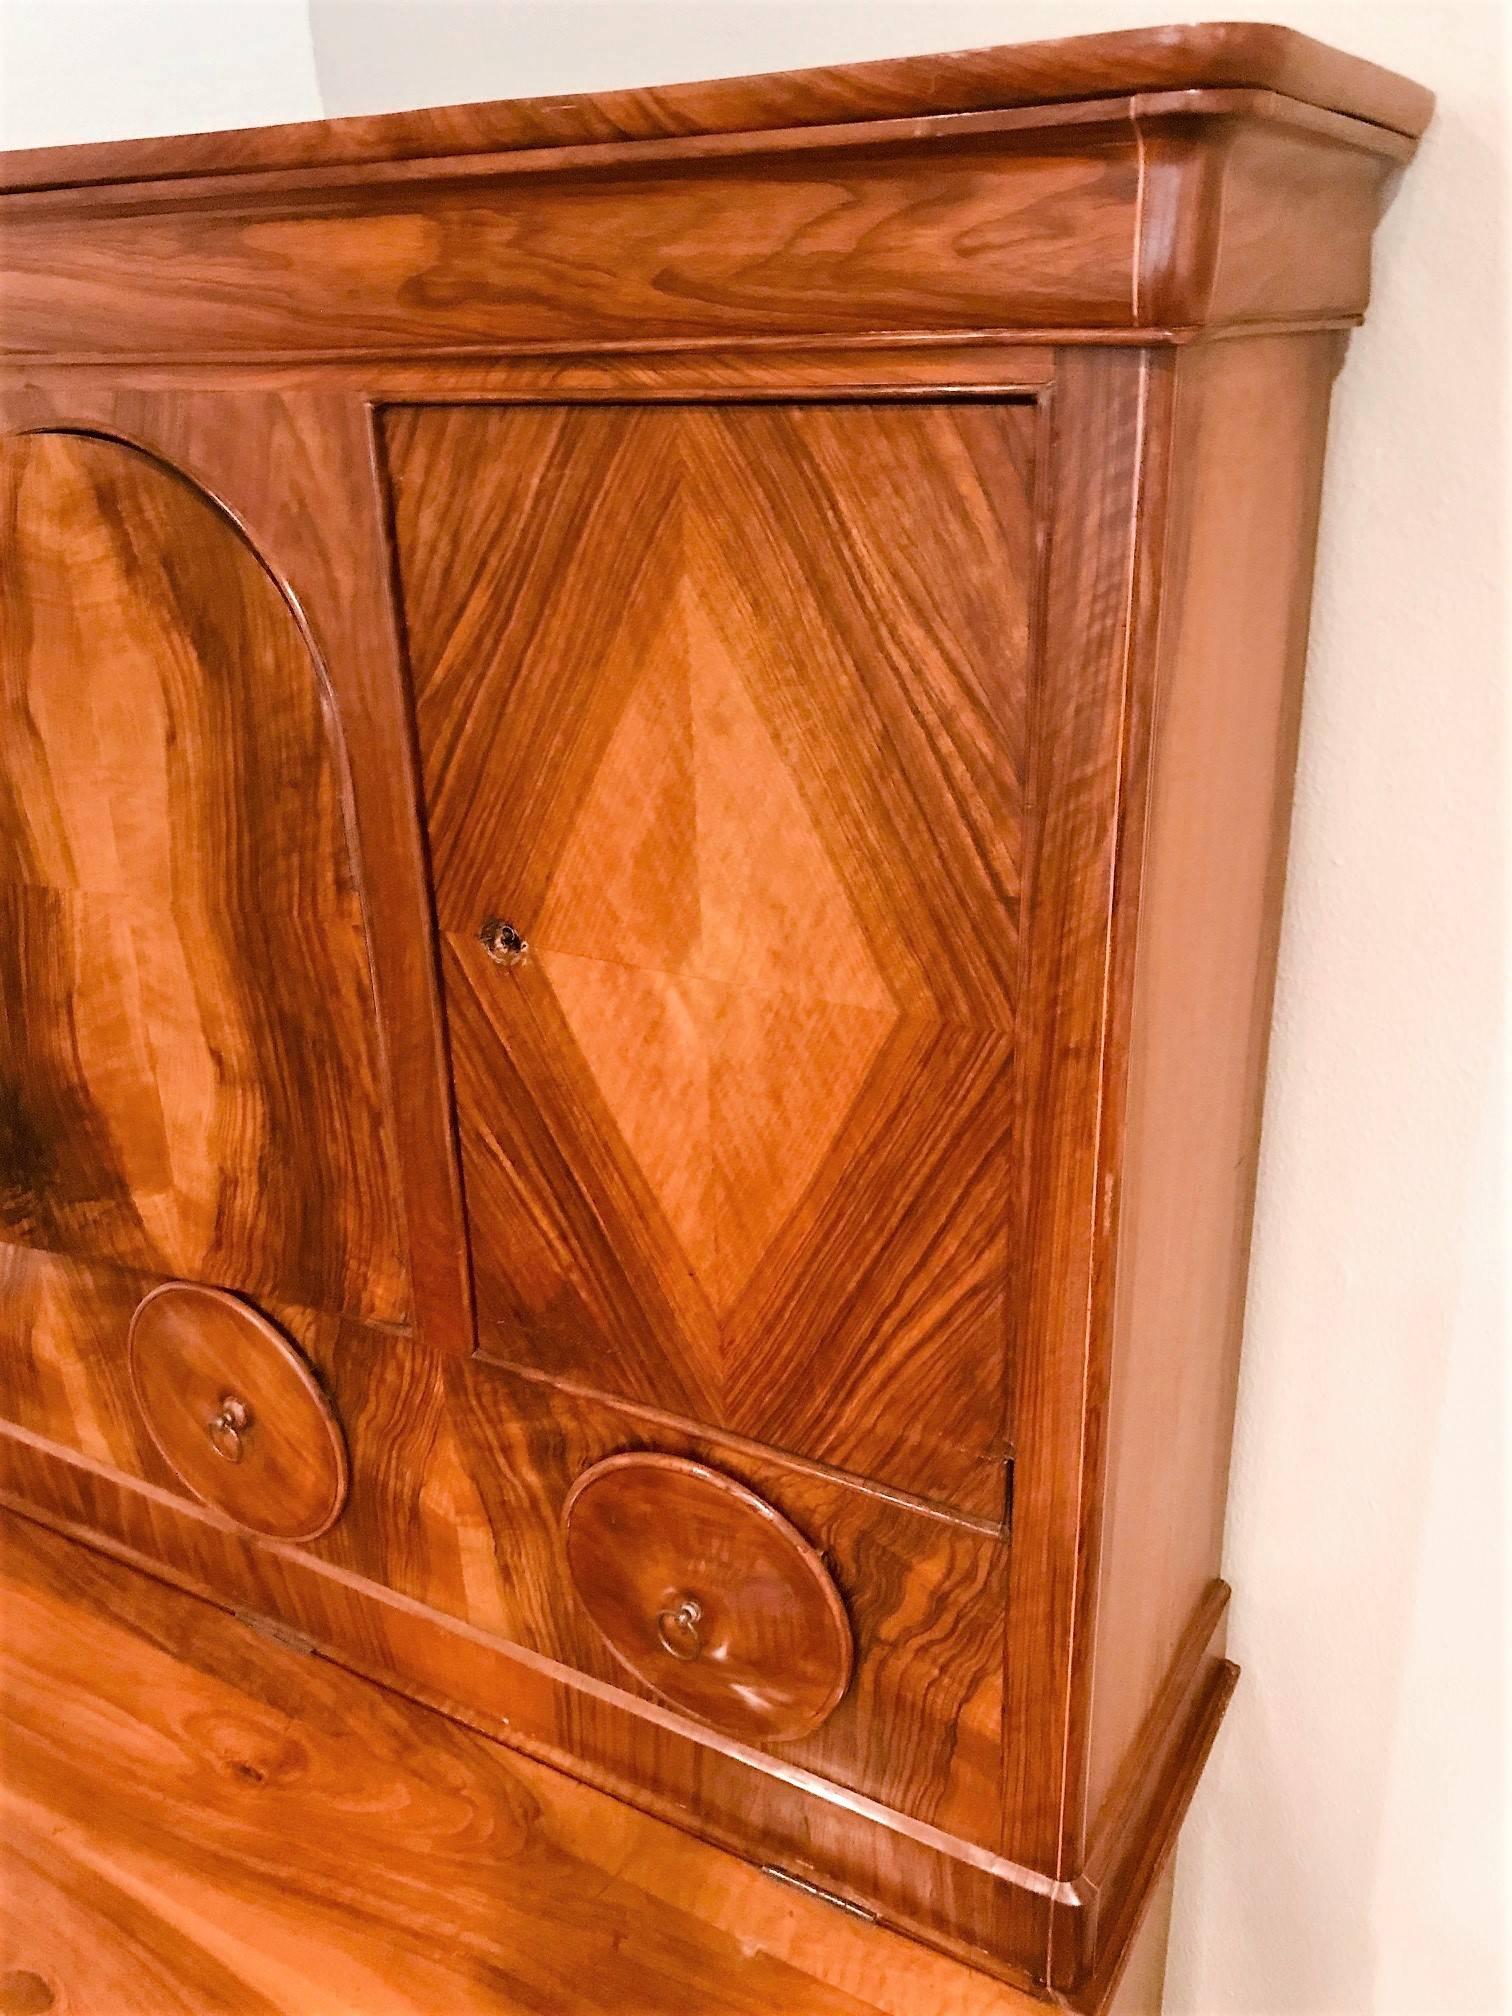 Outstanding antique Northern European Biedermeier style bureau bookcase in exotic veneers.

The top section with a lift top for secret storage above cabinets and three drawers with unique circular facings. The lower portion with a contoured